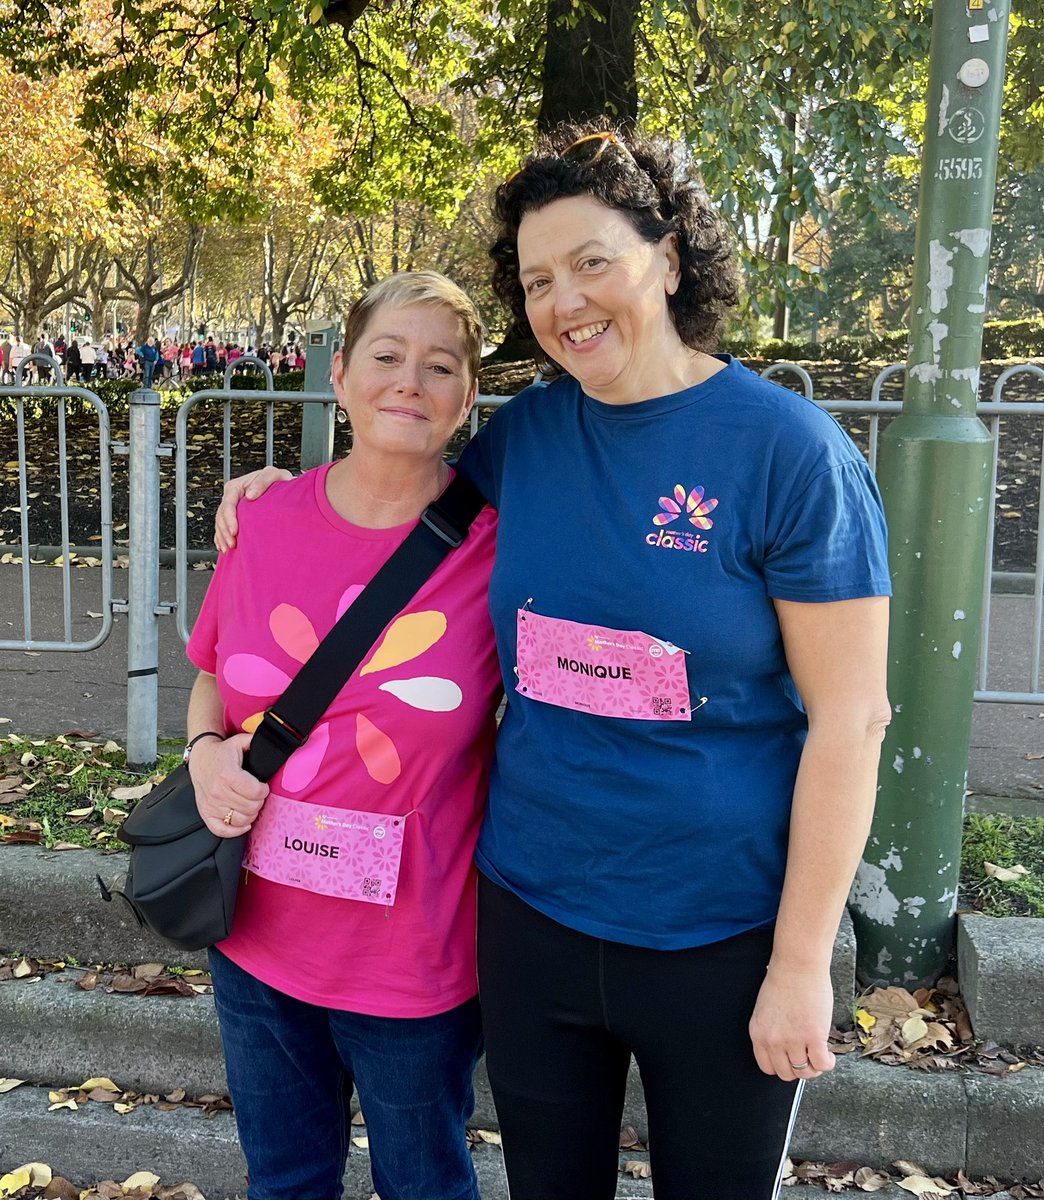 Wonderful to walk the Mother’s Day Classic with thousands of other Victorians this morning: since 1998, it’s raised $44 million for breast cancer research. This year, ovarian cancer is also a focus. Wishing a peaceful day, spent with people you love, to all Australian women.